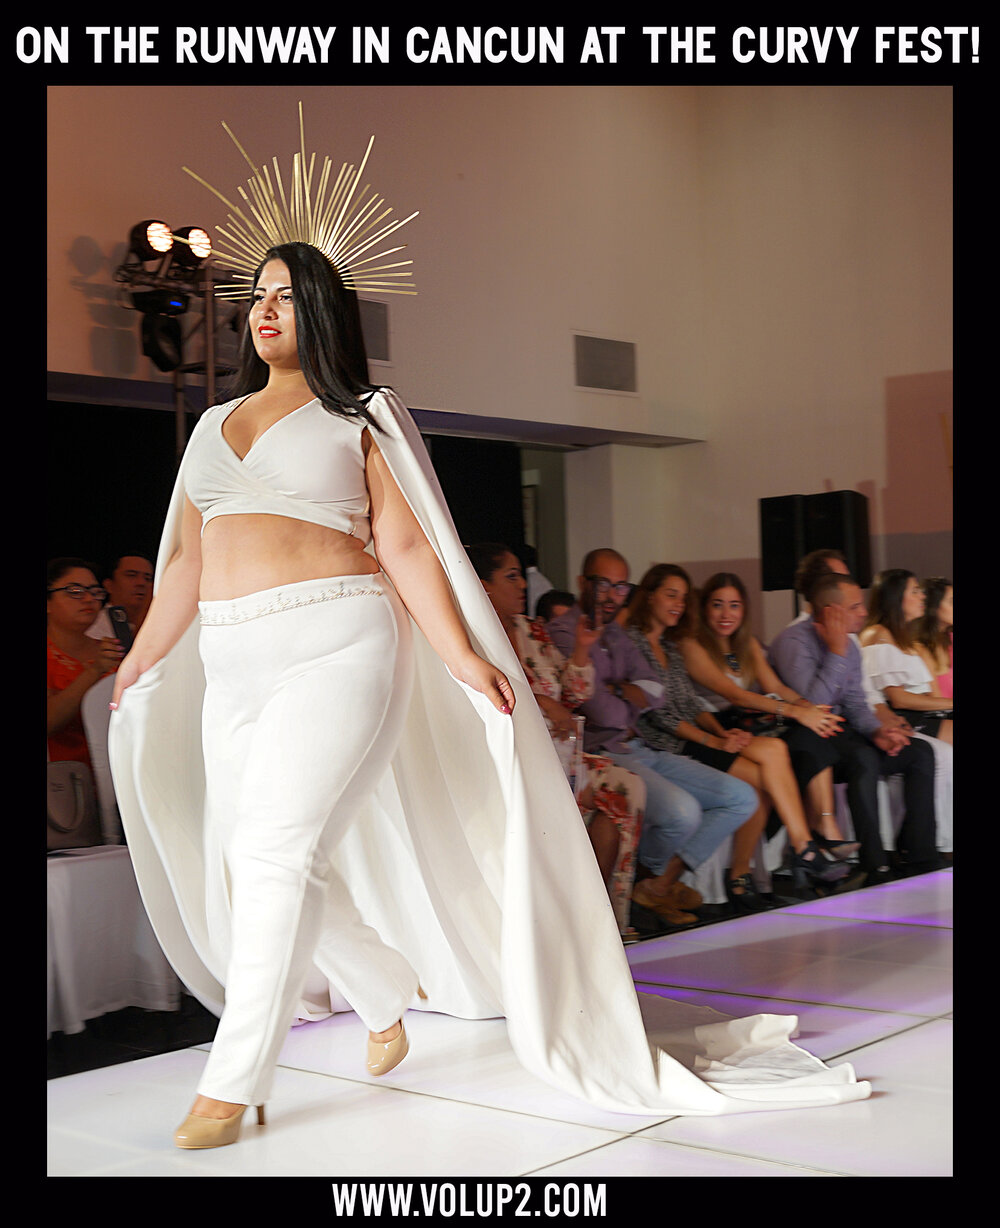 On the Runway in Cancun, at The Curvy Fest! Photos by Velvet d